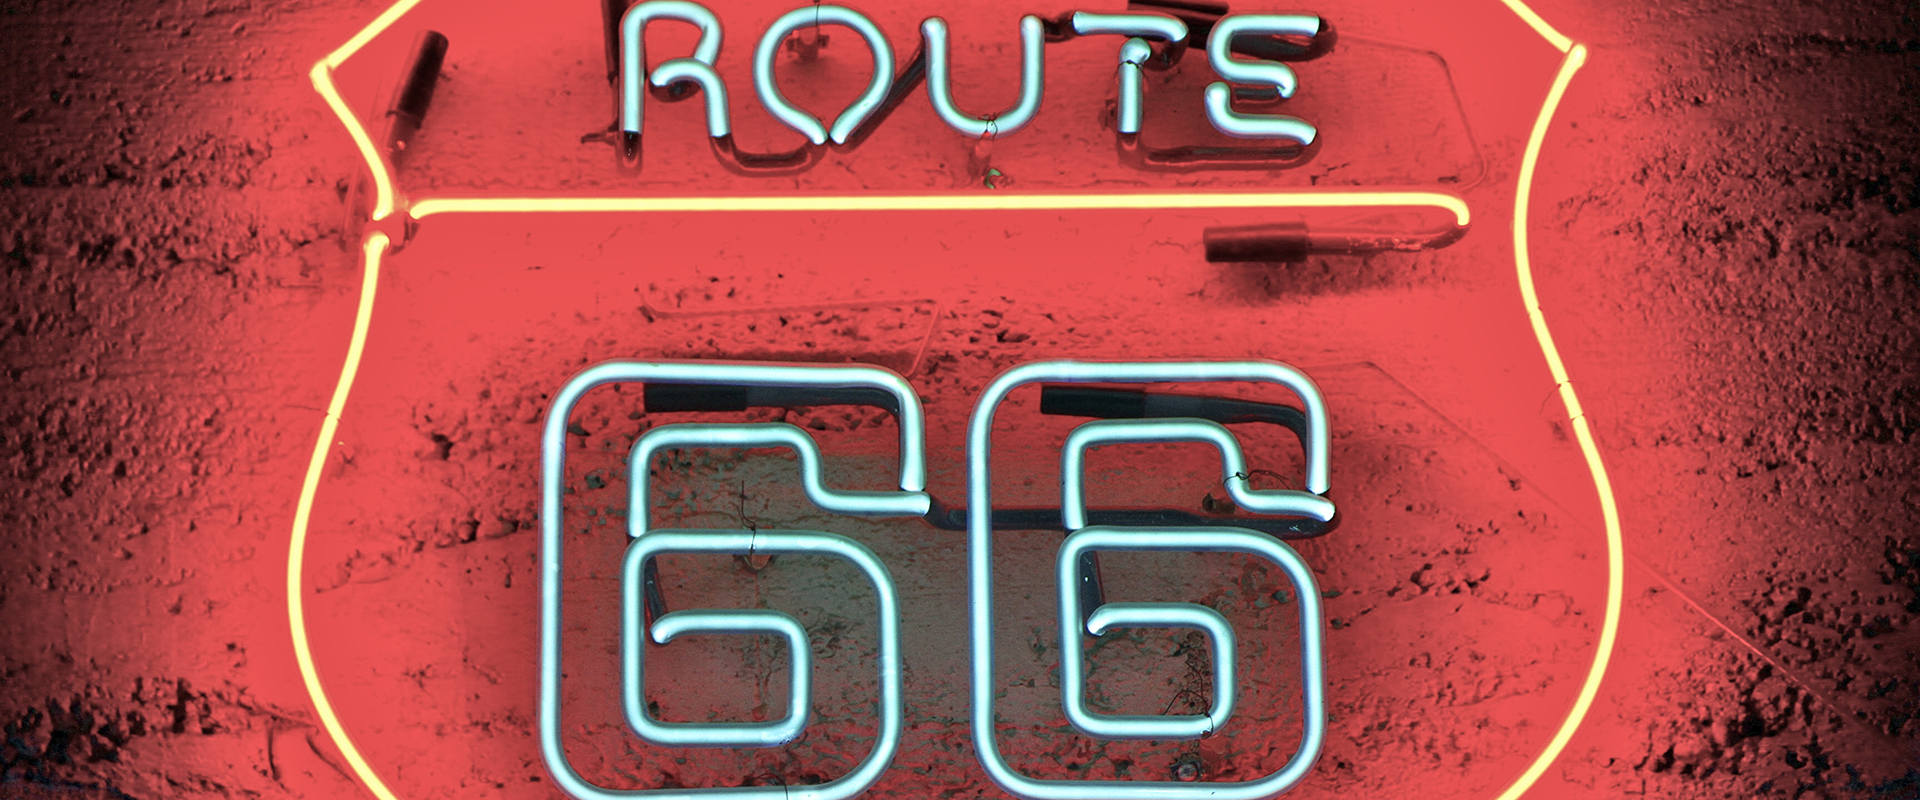 Route 66 neon light on red brick wall